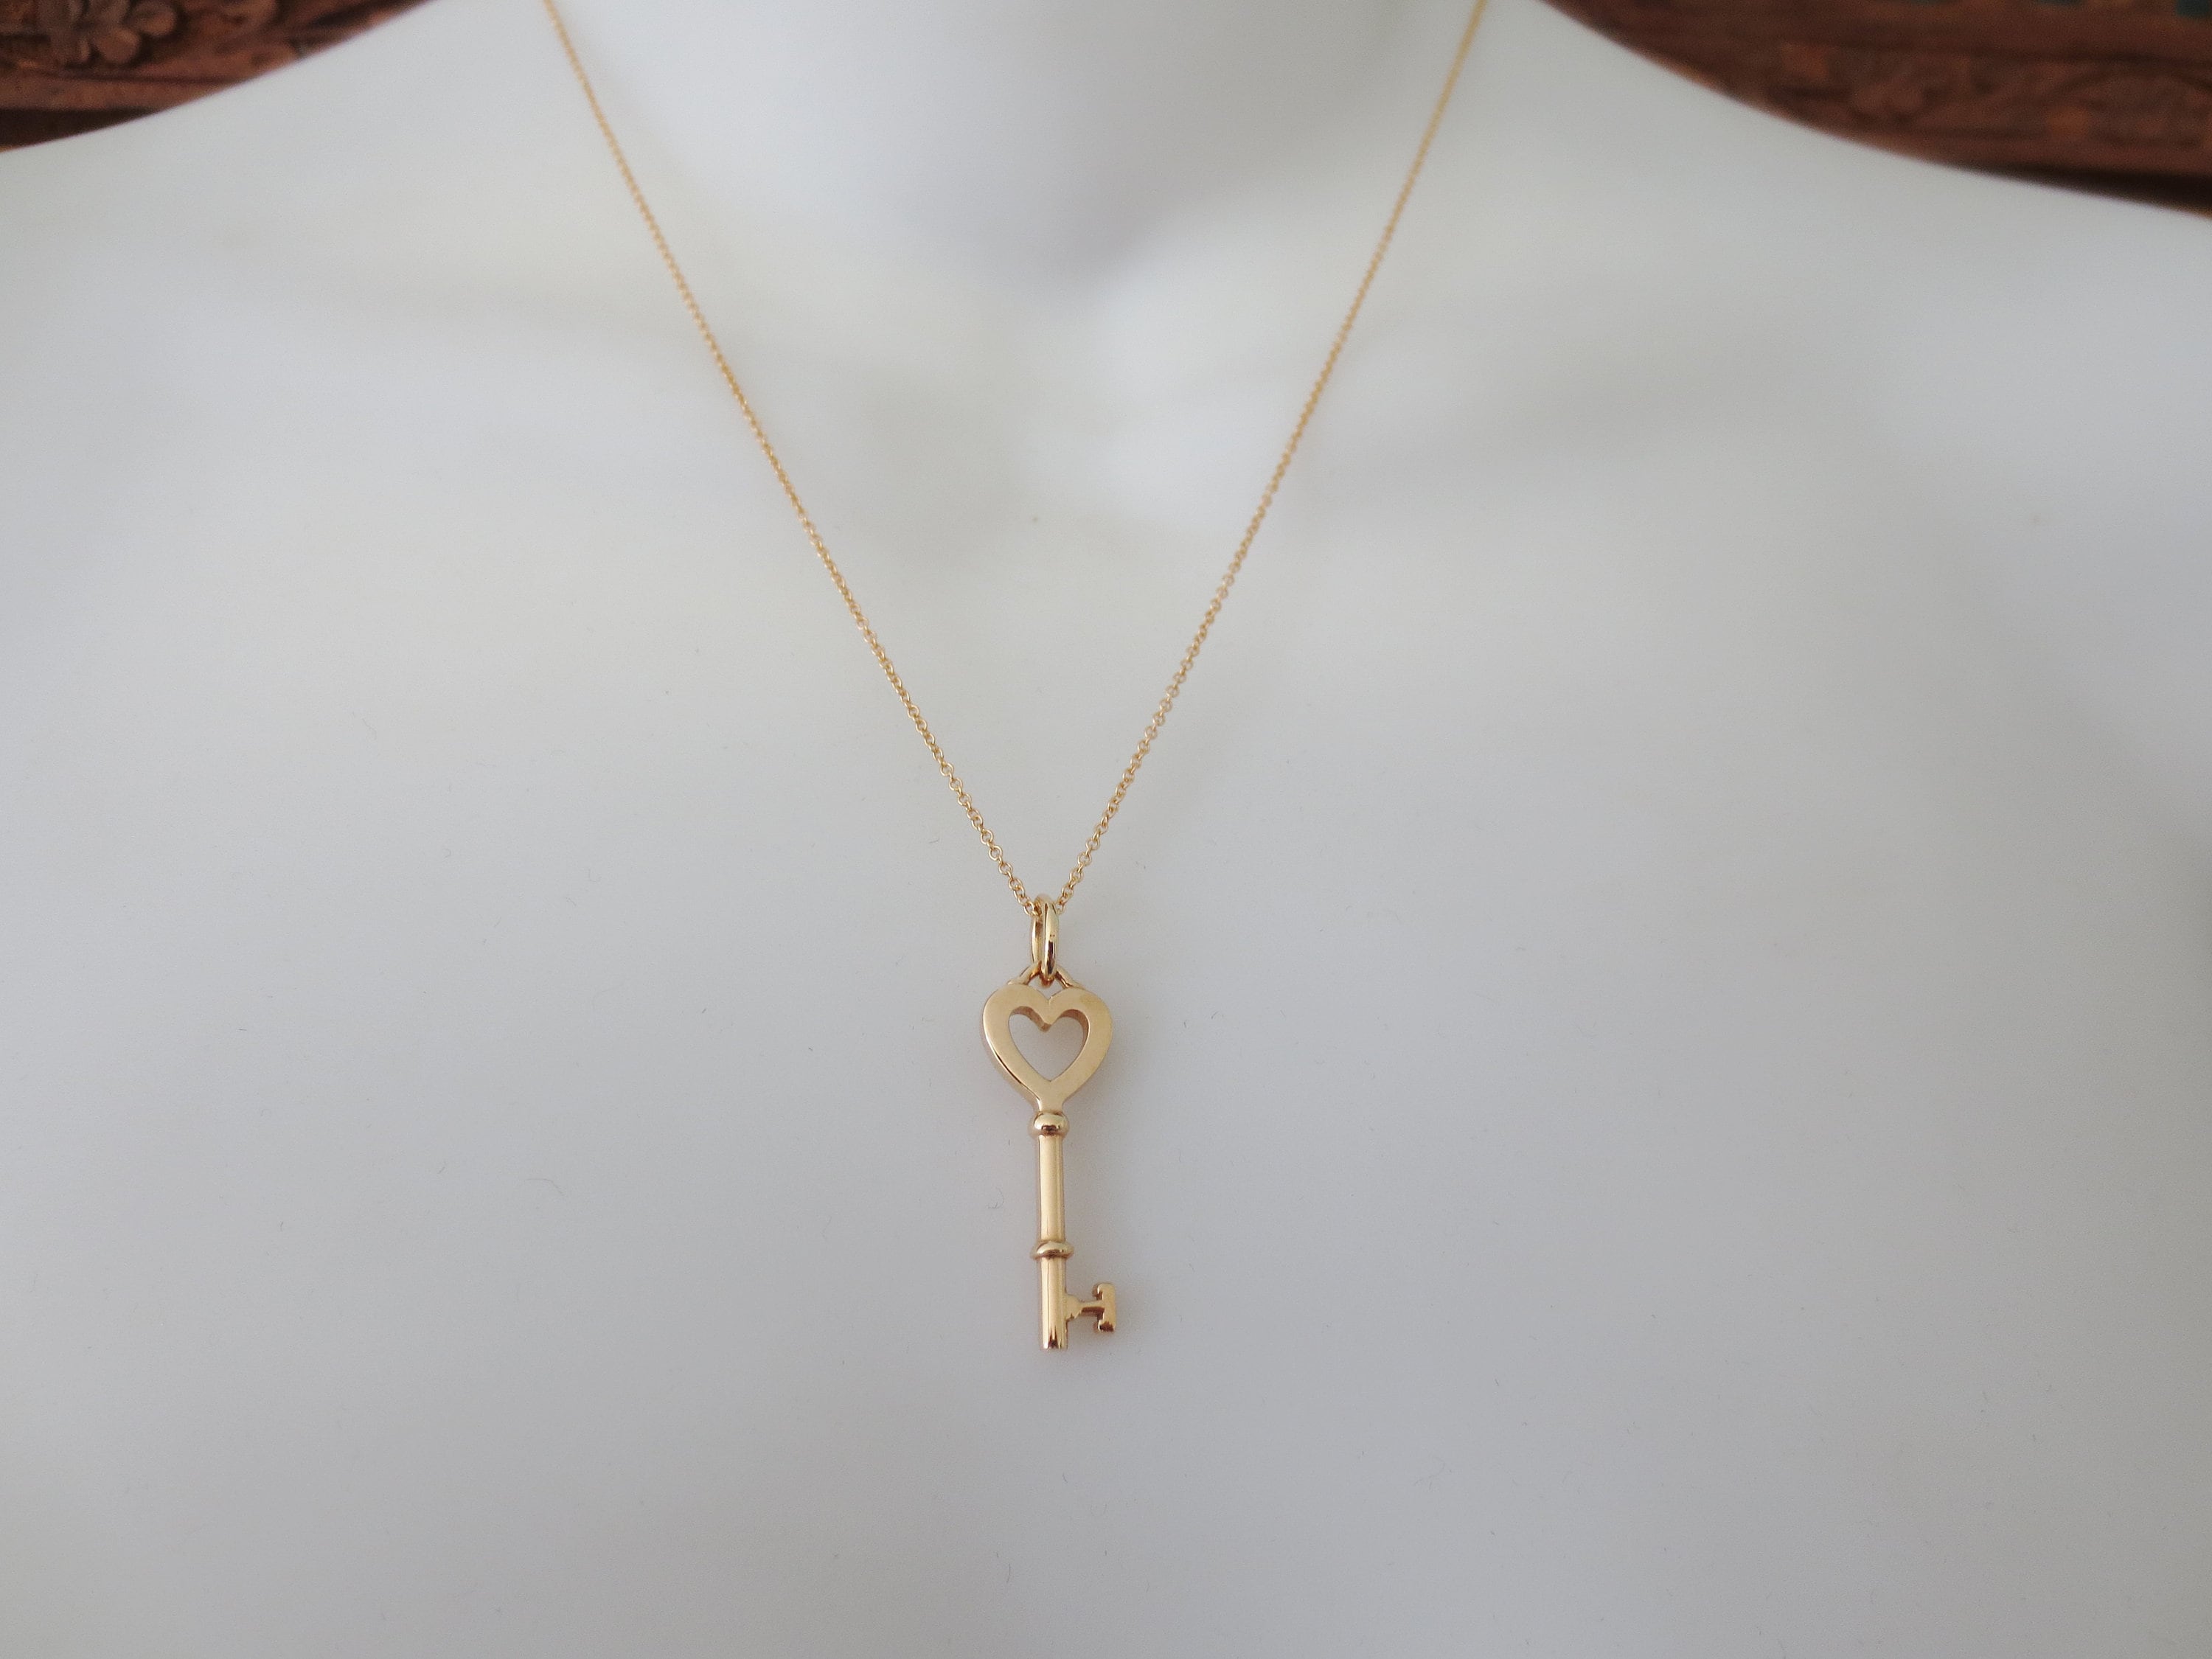 Tiffany and Co. 18K Rose Gold Lock and Key Heart Pendant Necklace